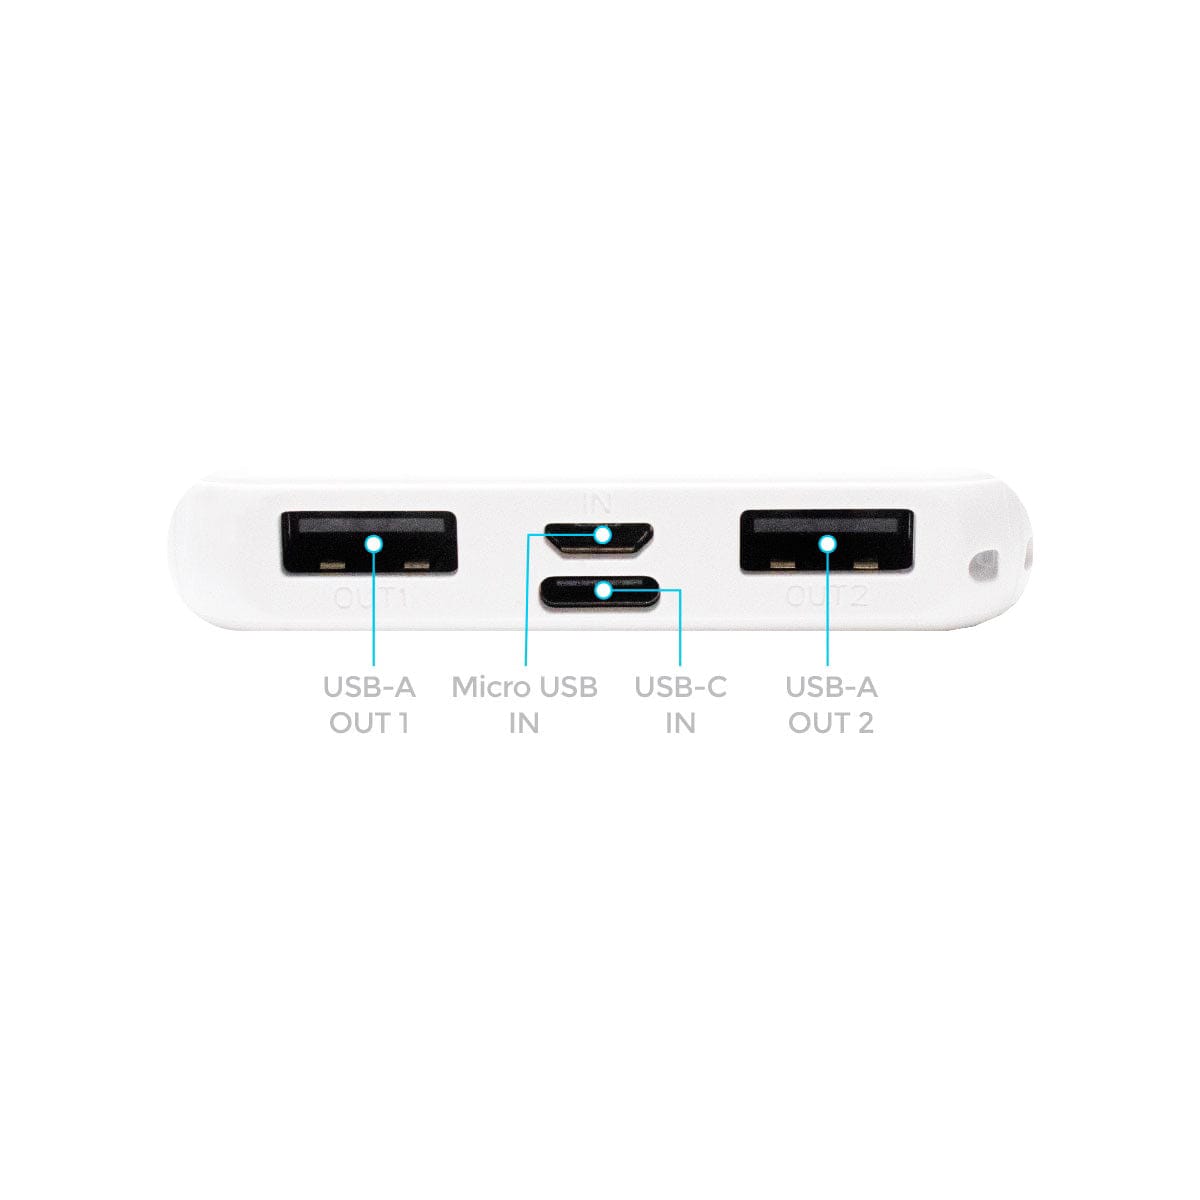 5000mAh Power Bank 10W, Portable Charger, White, Bottom View, Displaying Charging Ports - Micro USB, USB-C, and 2 USB-A.